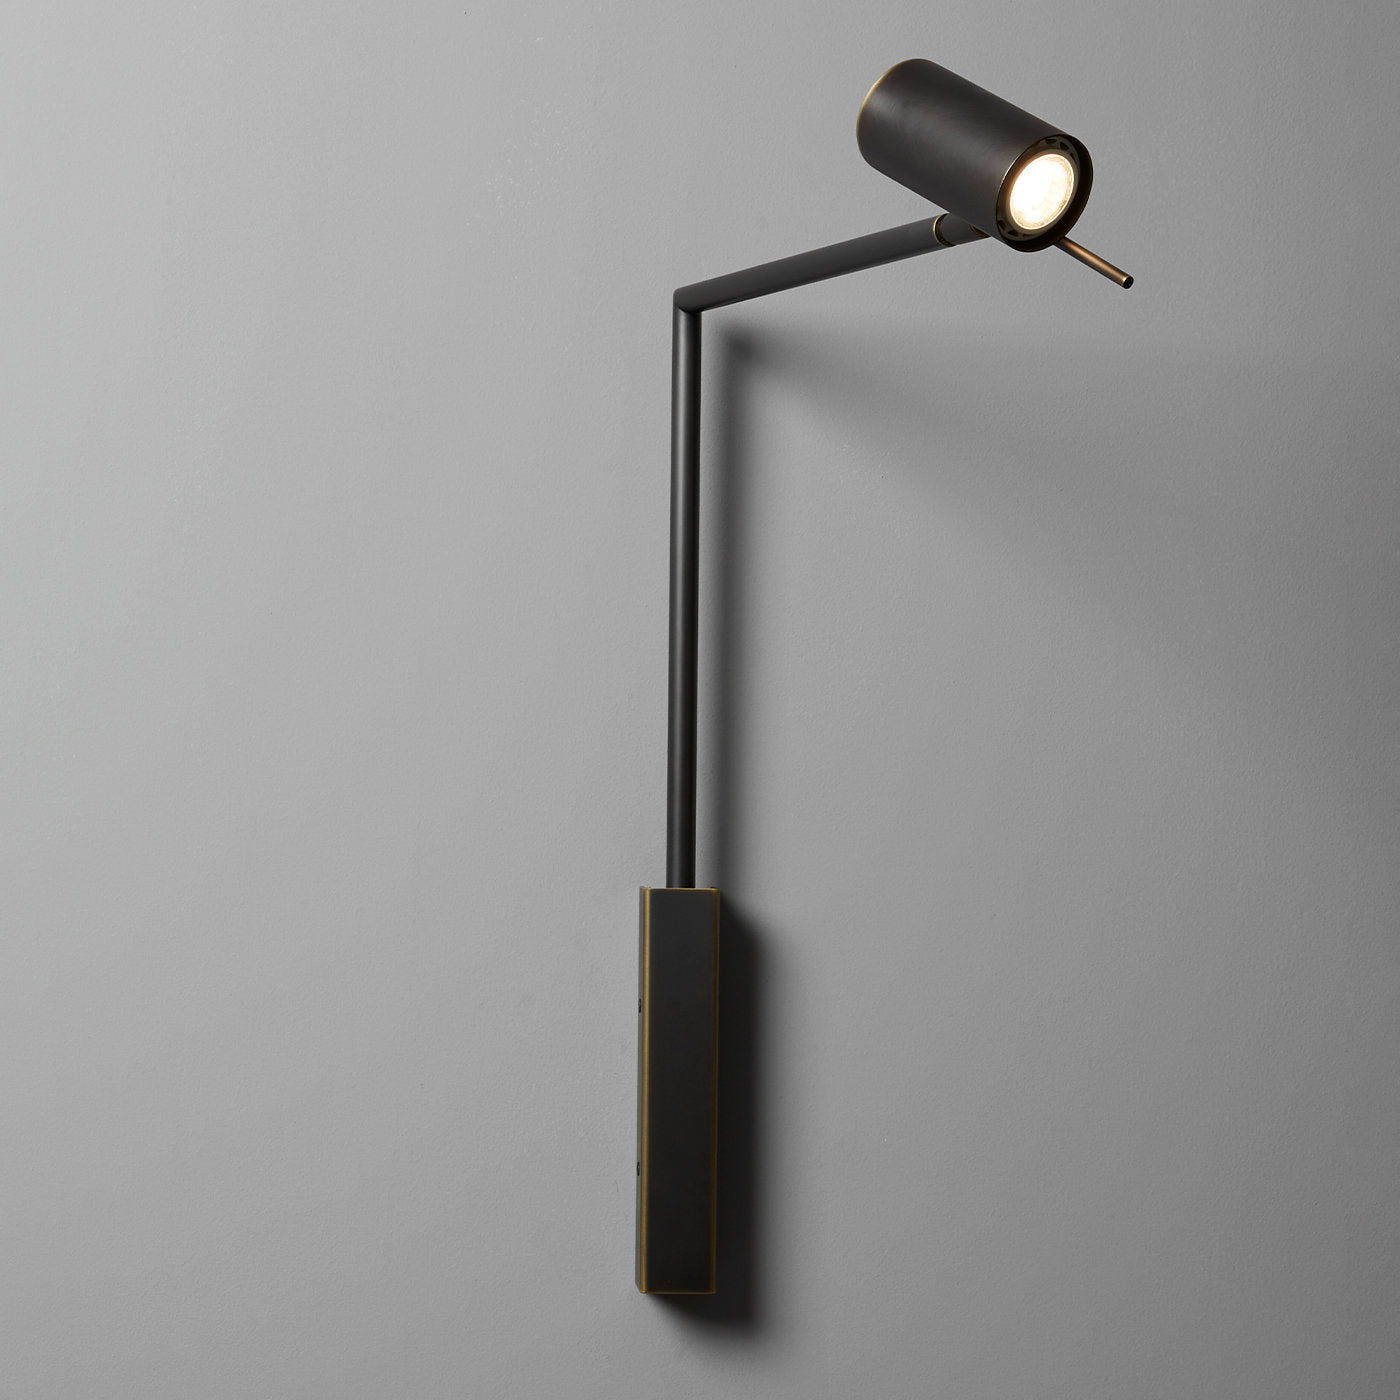 Rectus Wall Lamp with Adjustable Arm - Alternative view 2